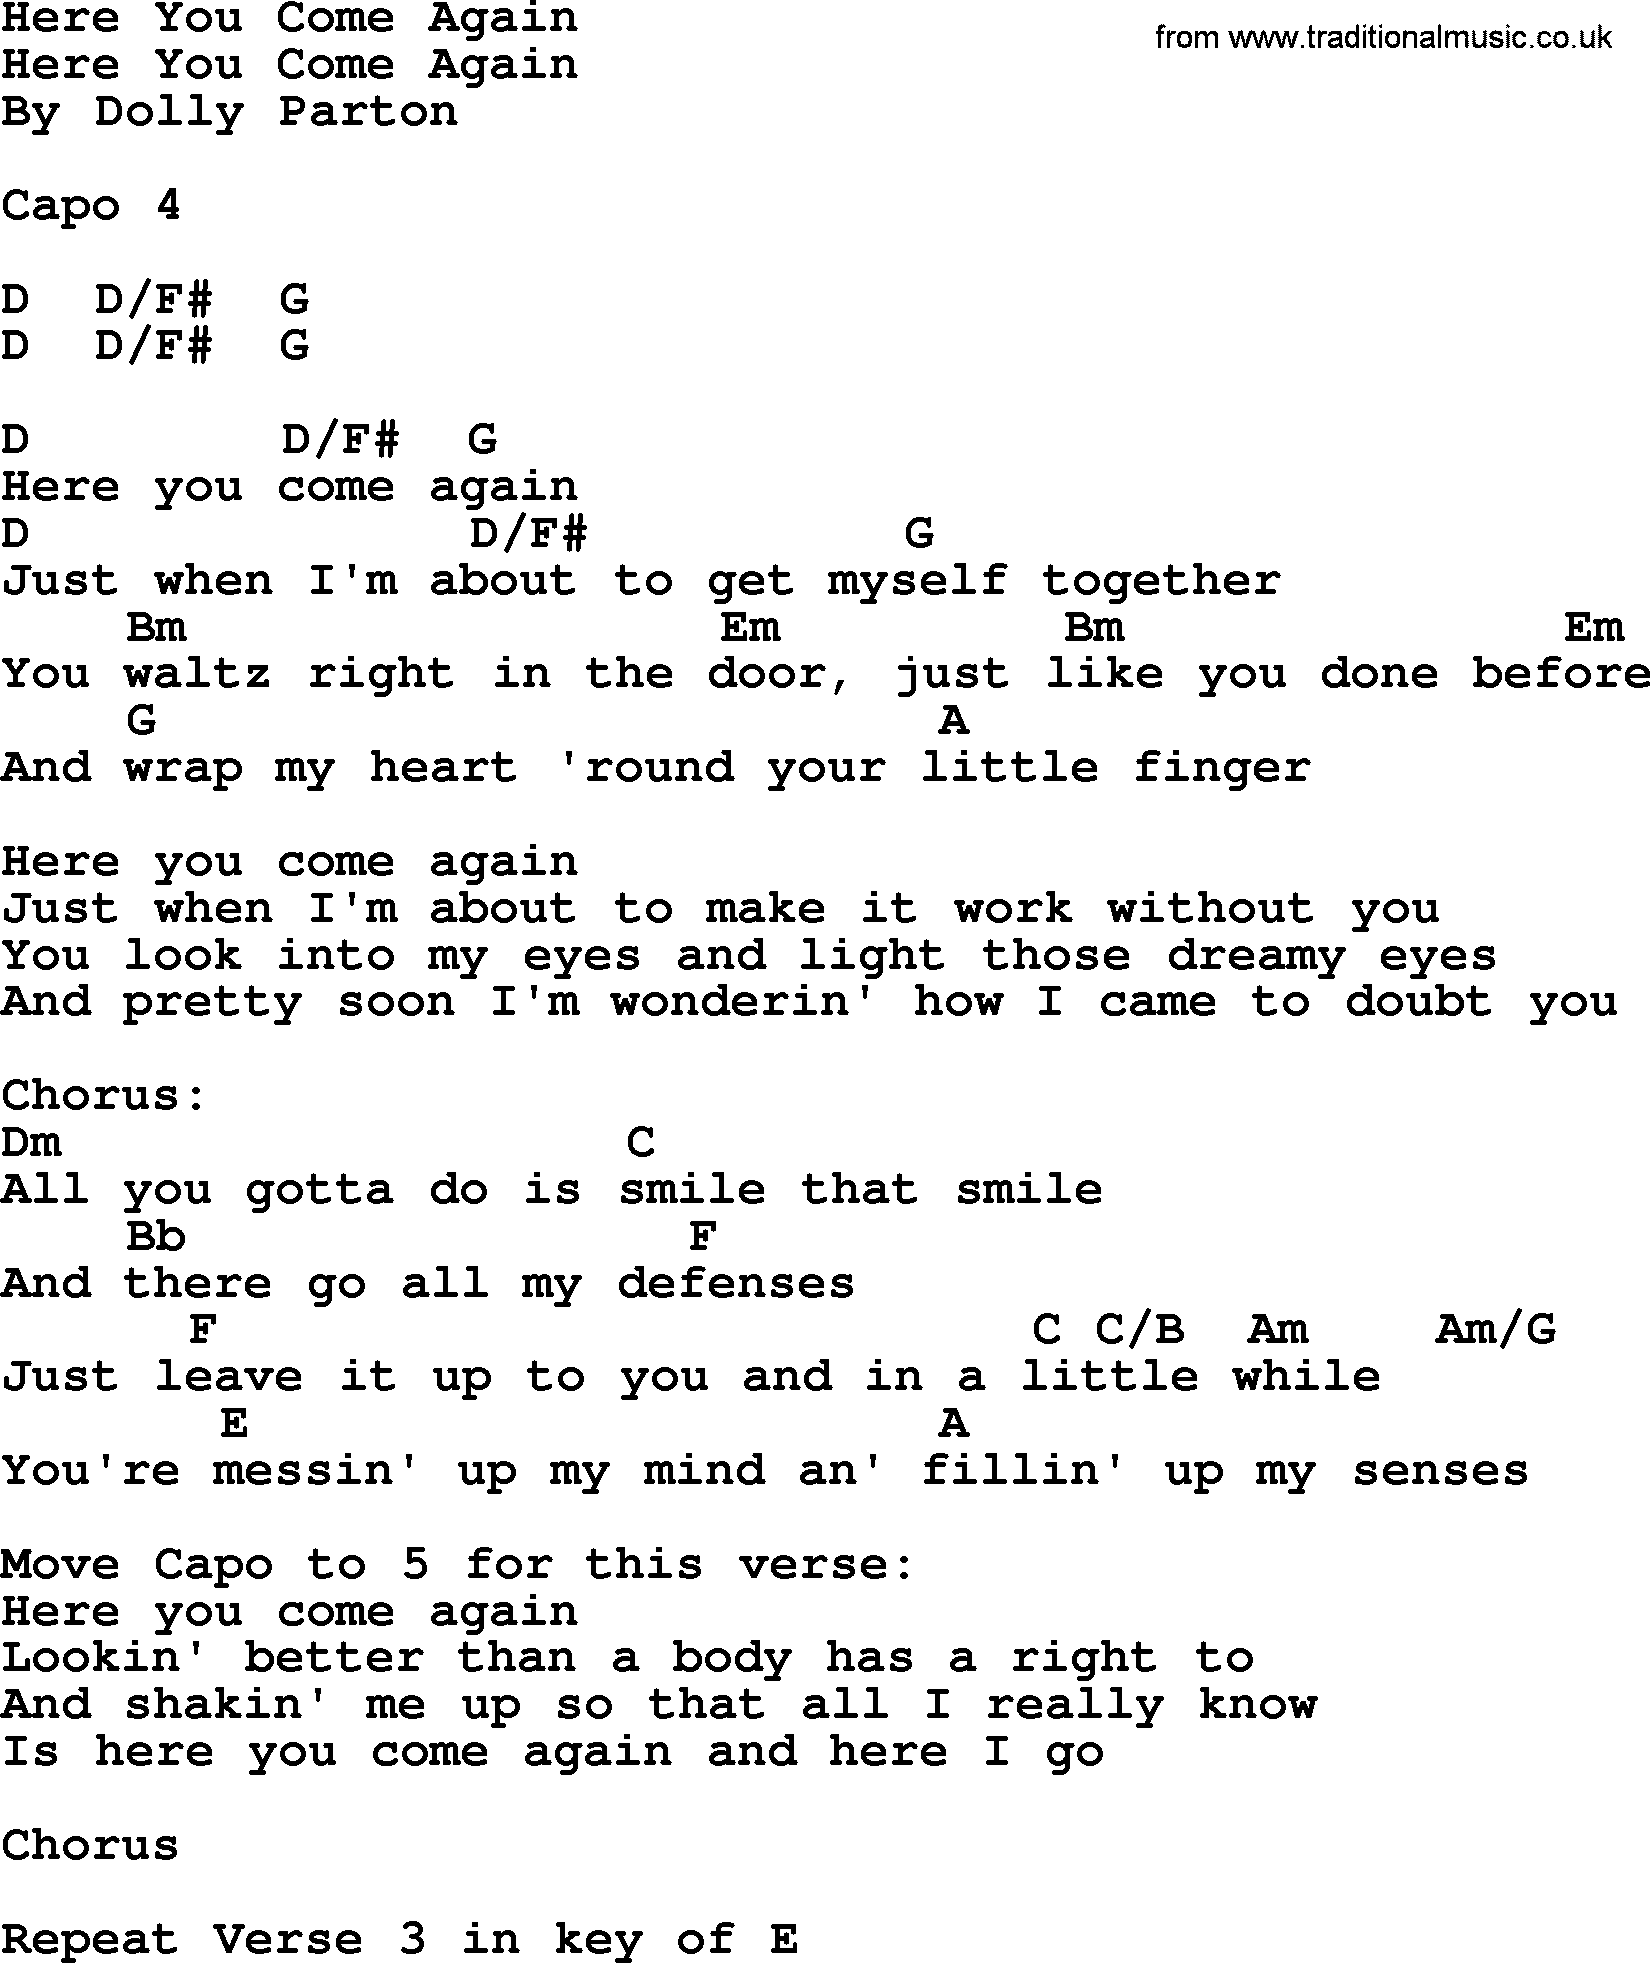 Bluegrass song: Here You Come Again, lyrics and chords